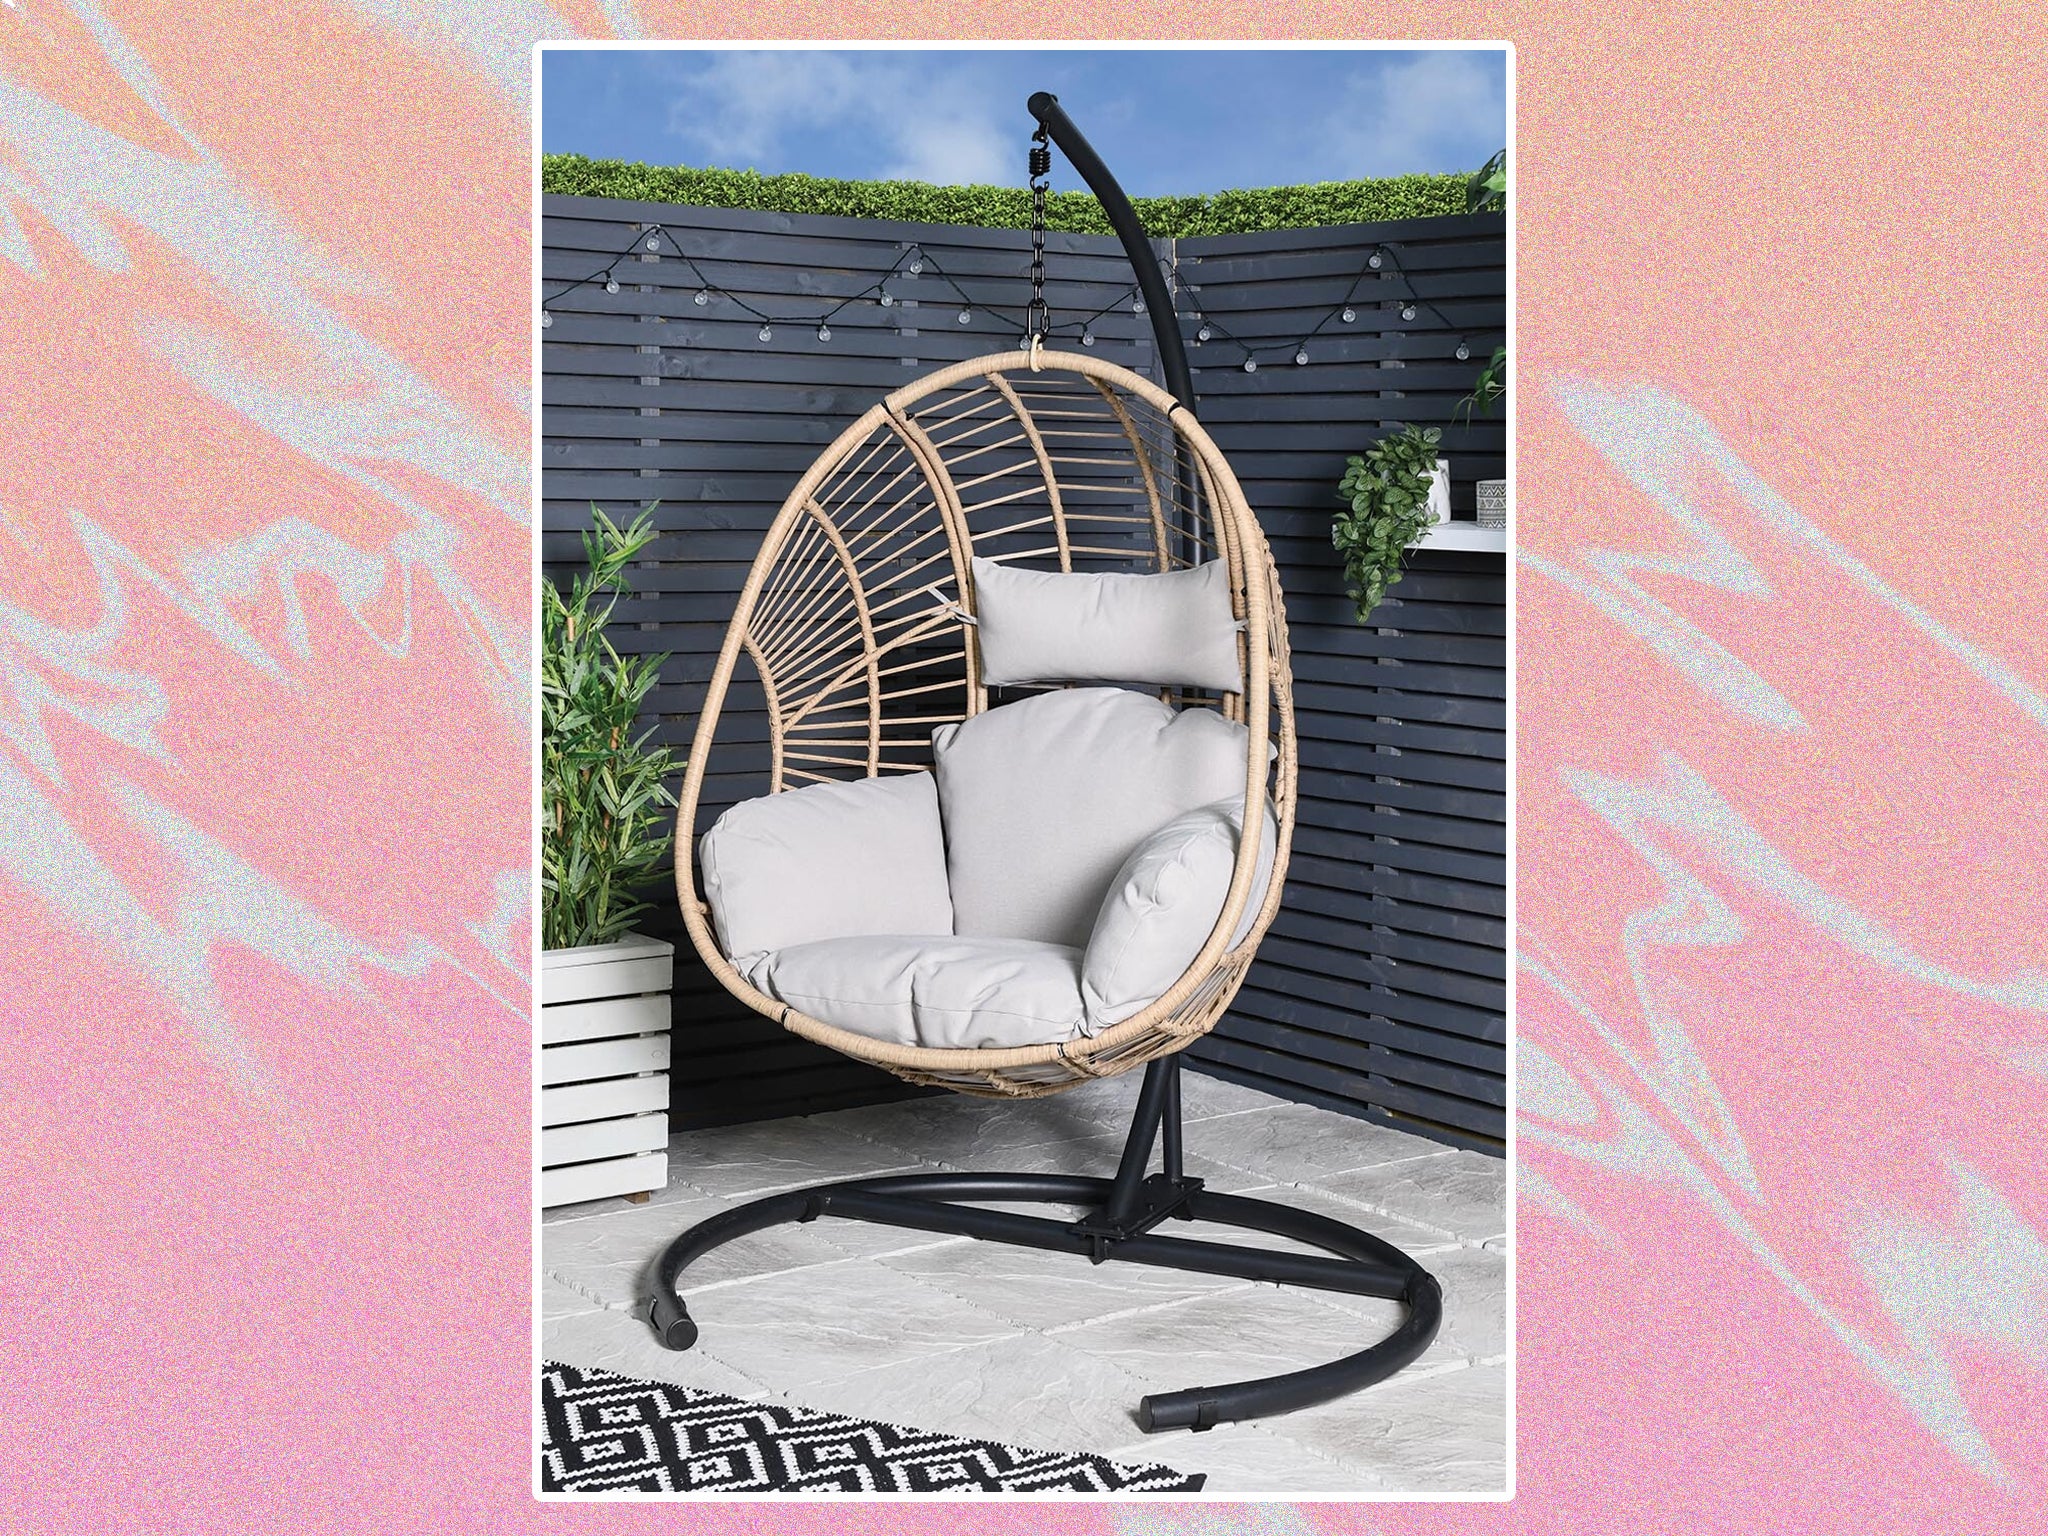 The budget retailer is also selling a cheaper £129.99 helicopter hanging chair